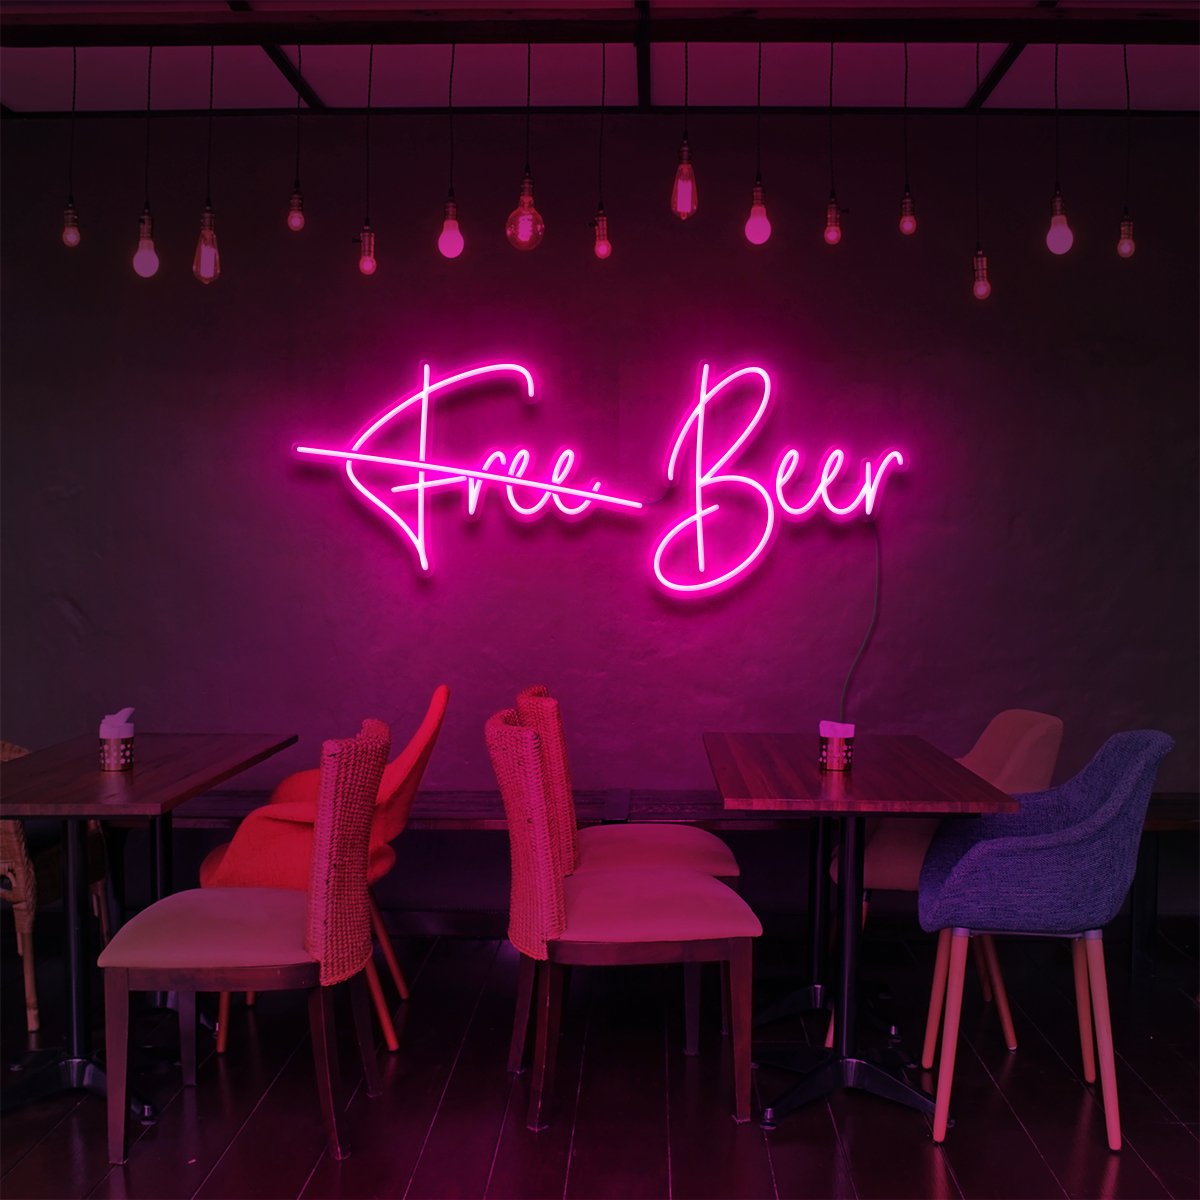 "Free Beer" Neon Sign for Bars & Restaurants 60cm (2ft) / Pink / LED Neon by Neon Icons